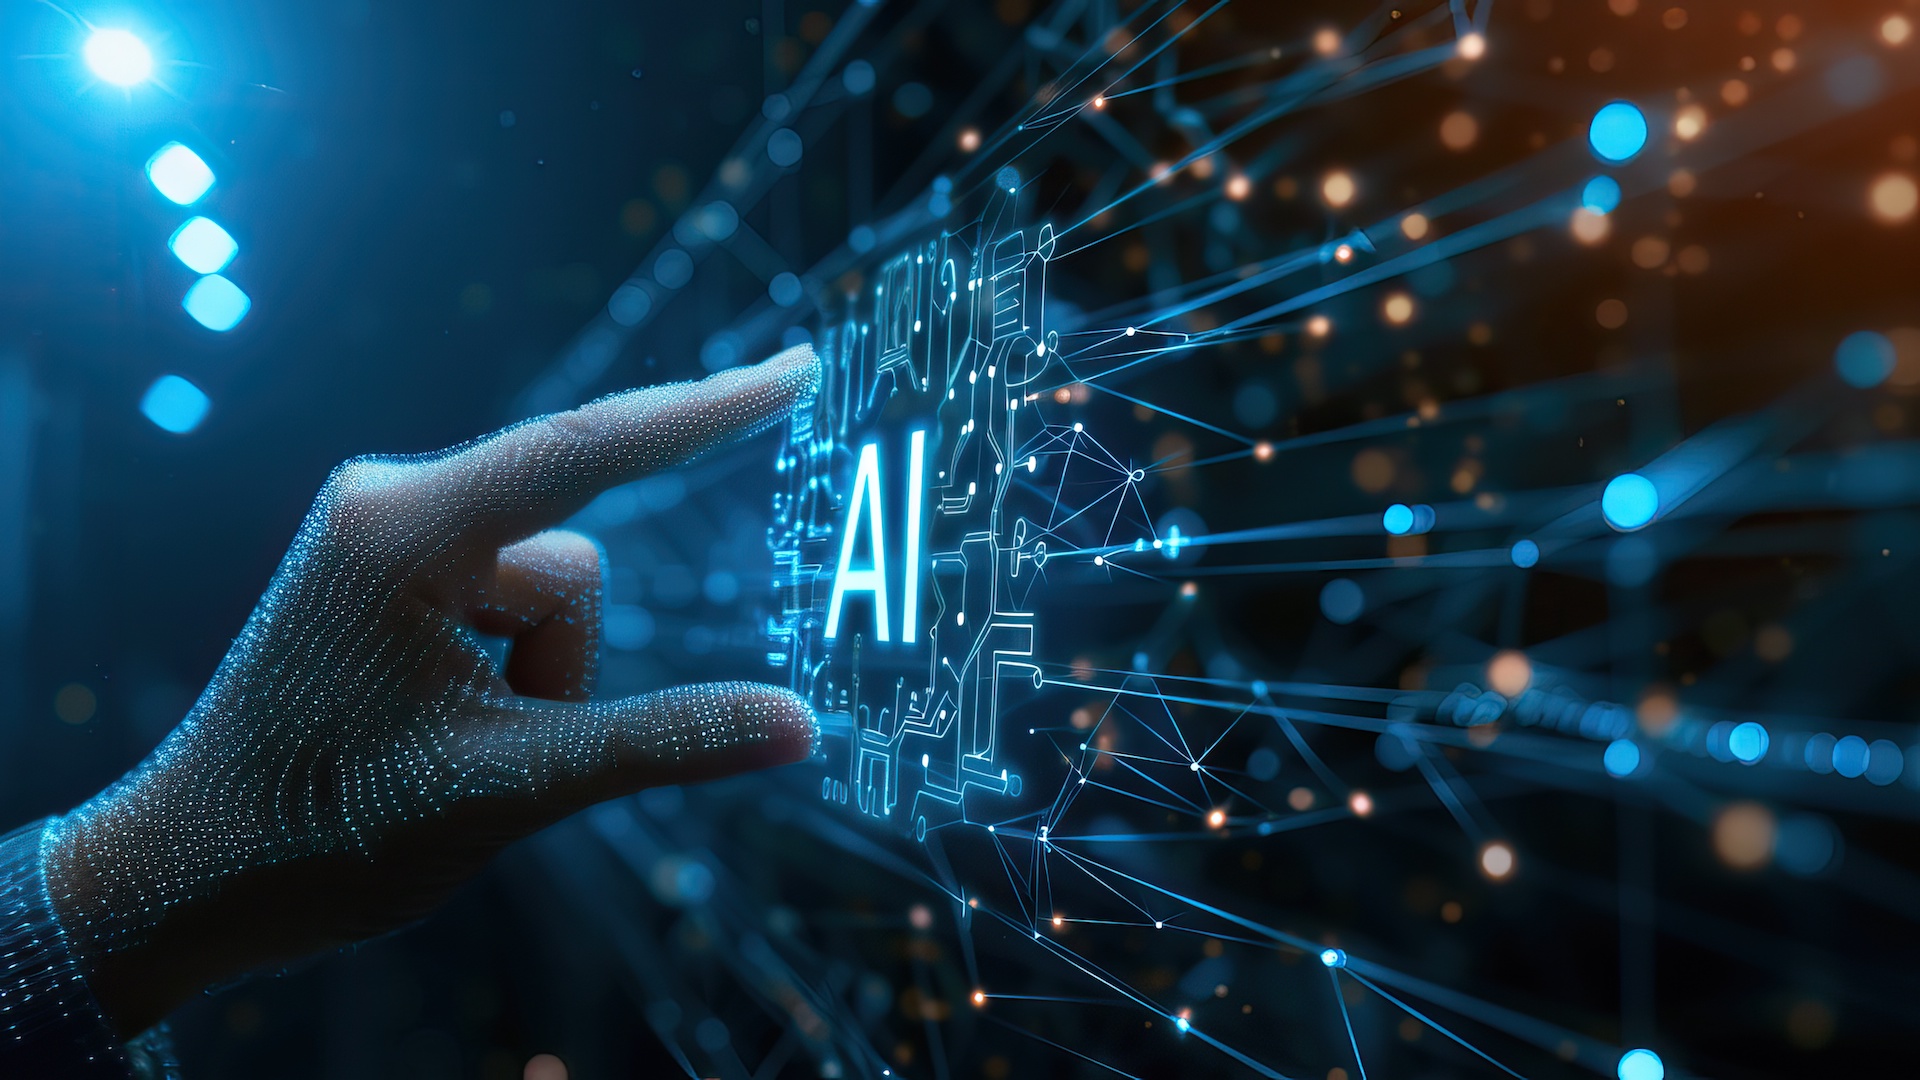 UN General Assembly takes first step in global AI governance